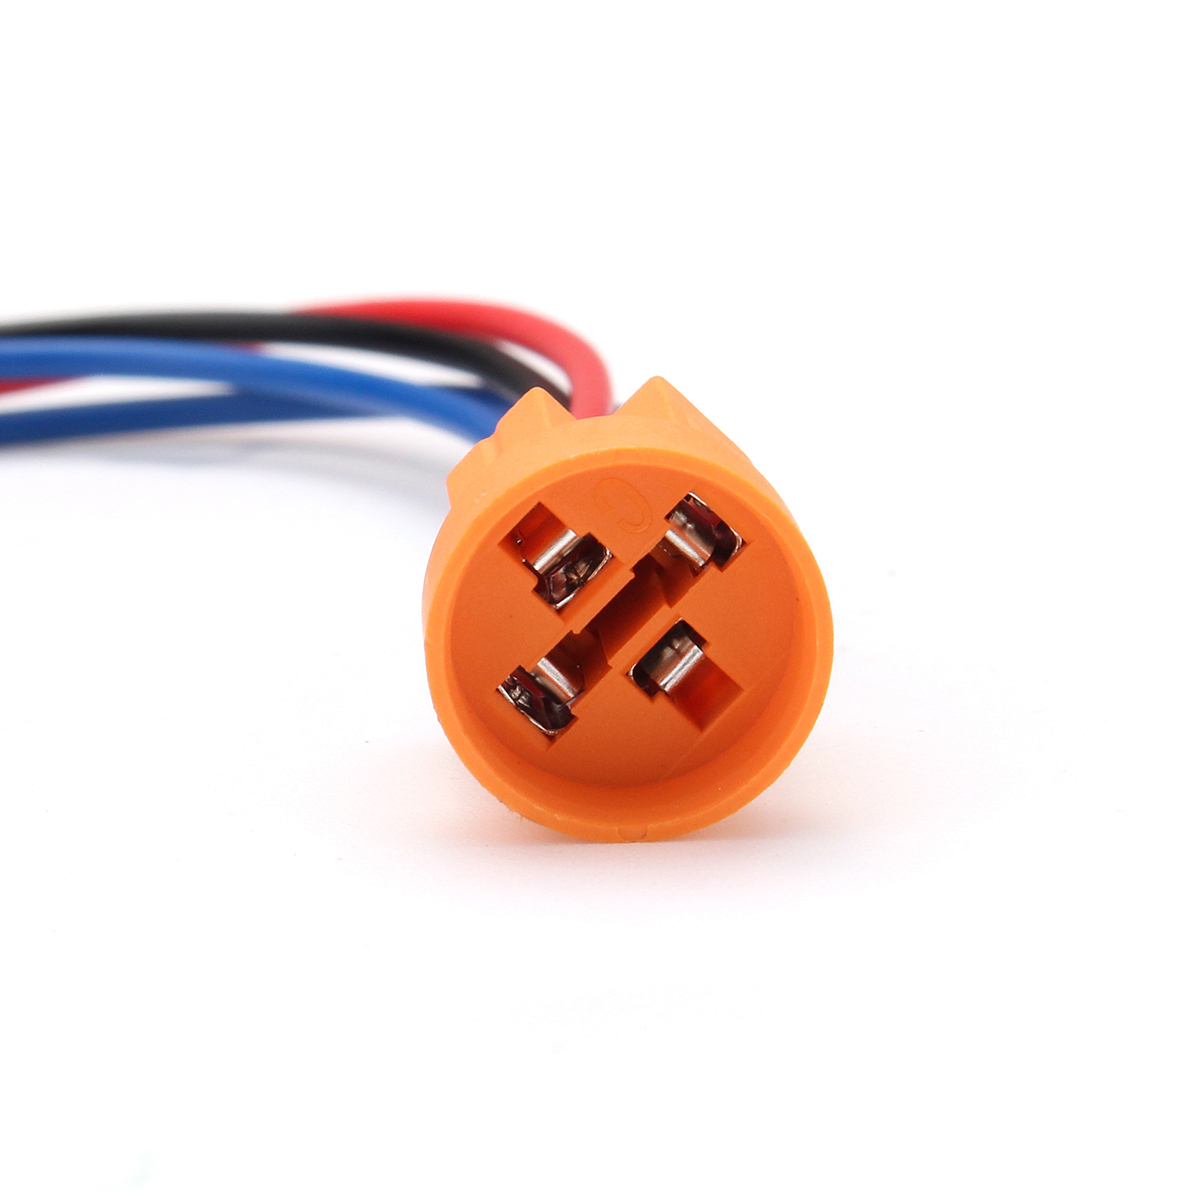 12V-24V-4Pin-12mm-Metal-ONOFF-LED-Push-Button-Switch-Wiring-Harness-Switch-Self-Locking-Waterproof-1225089-5